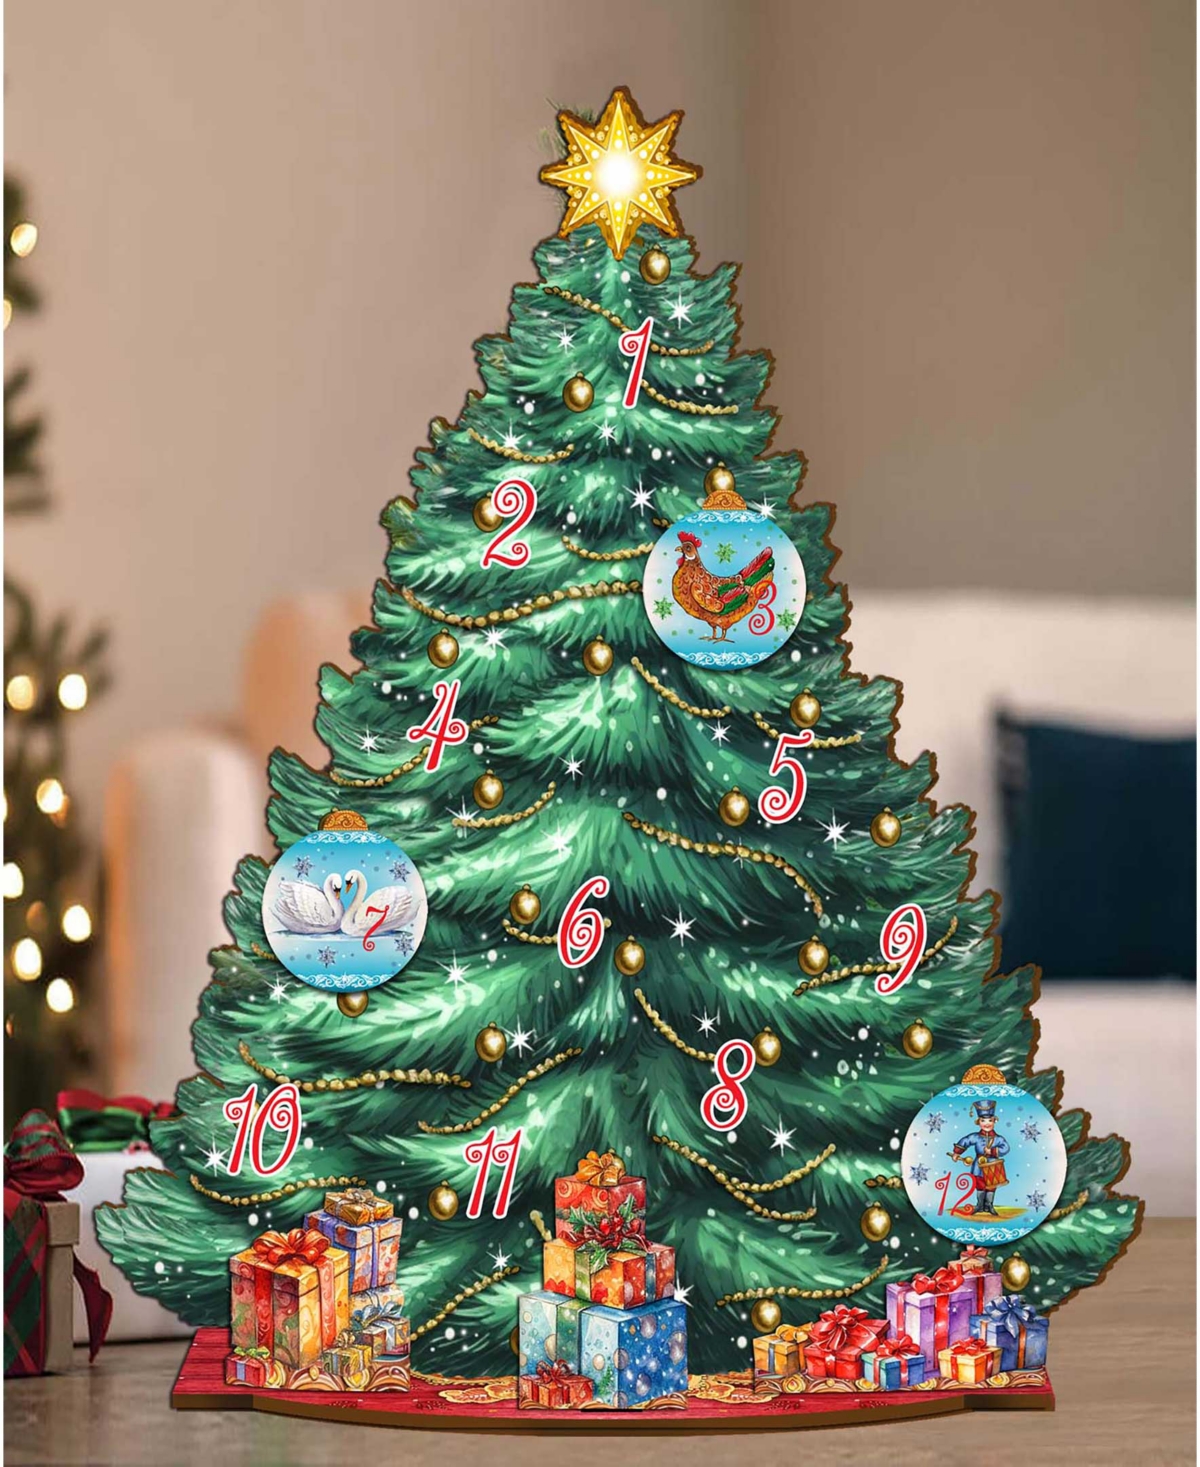 Shop Designocracy 12 Days Themed Wooden Christmas Tree With Ornaments Set Of 19 G. Debrekht In Multi Color